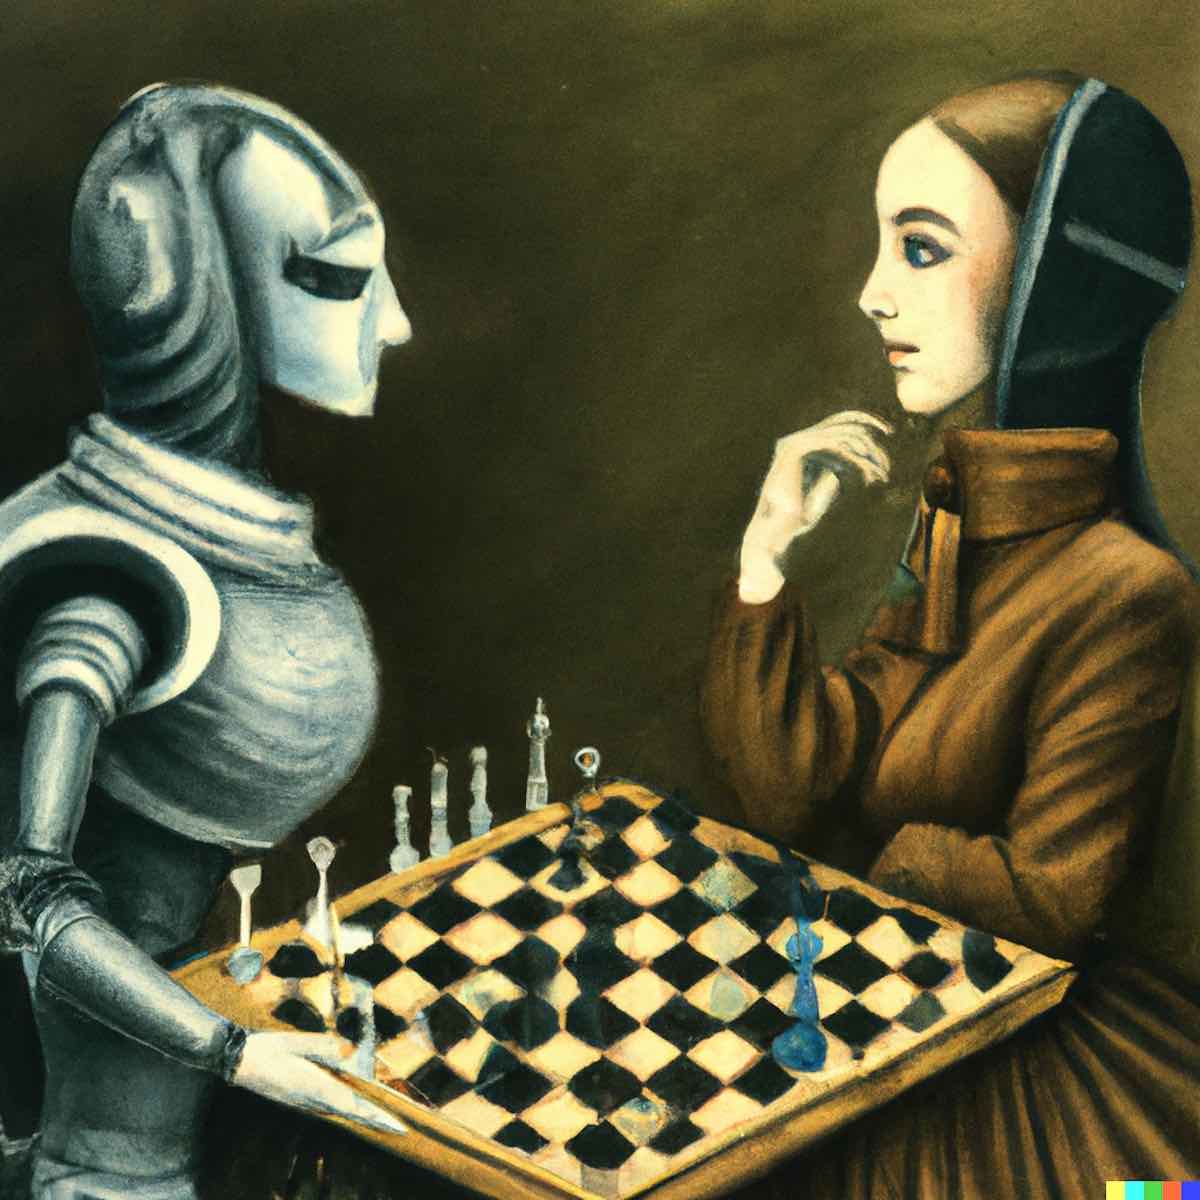 "Artificial intelligence droid vs human playing chess" by Rembrant
